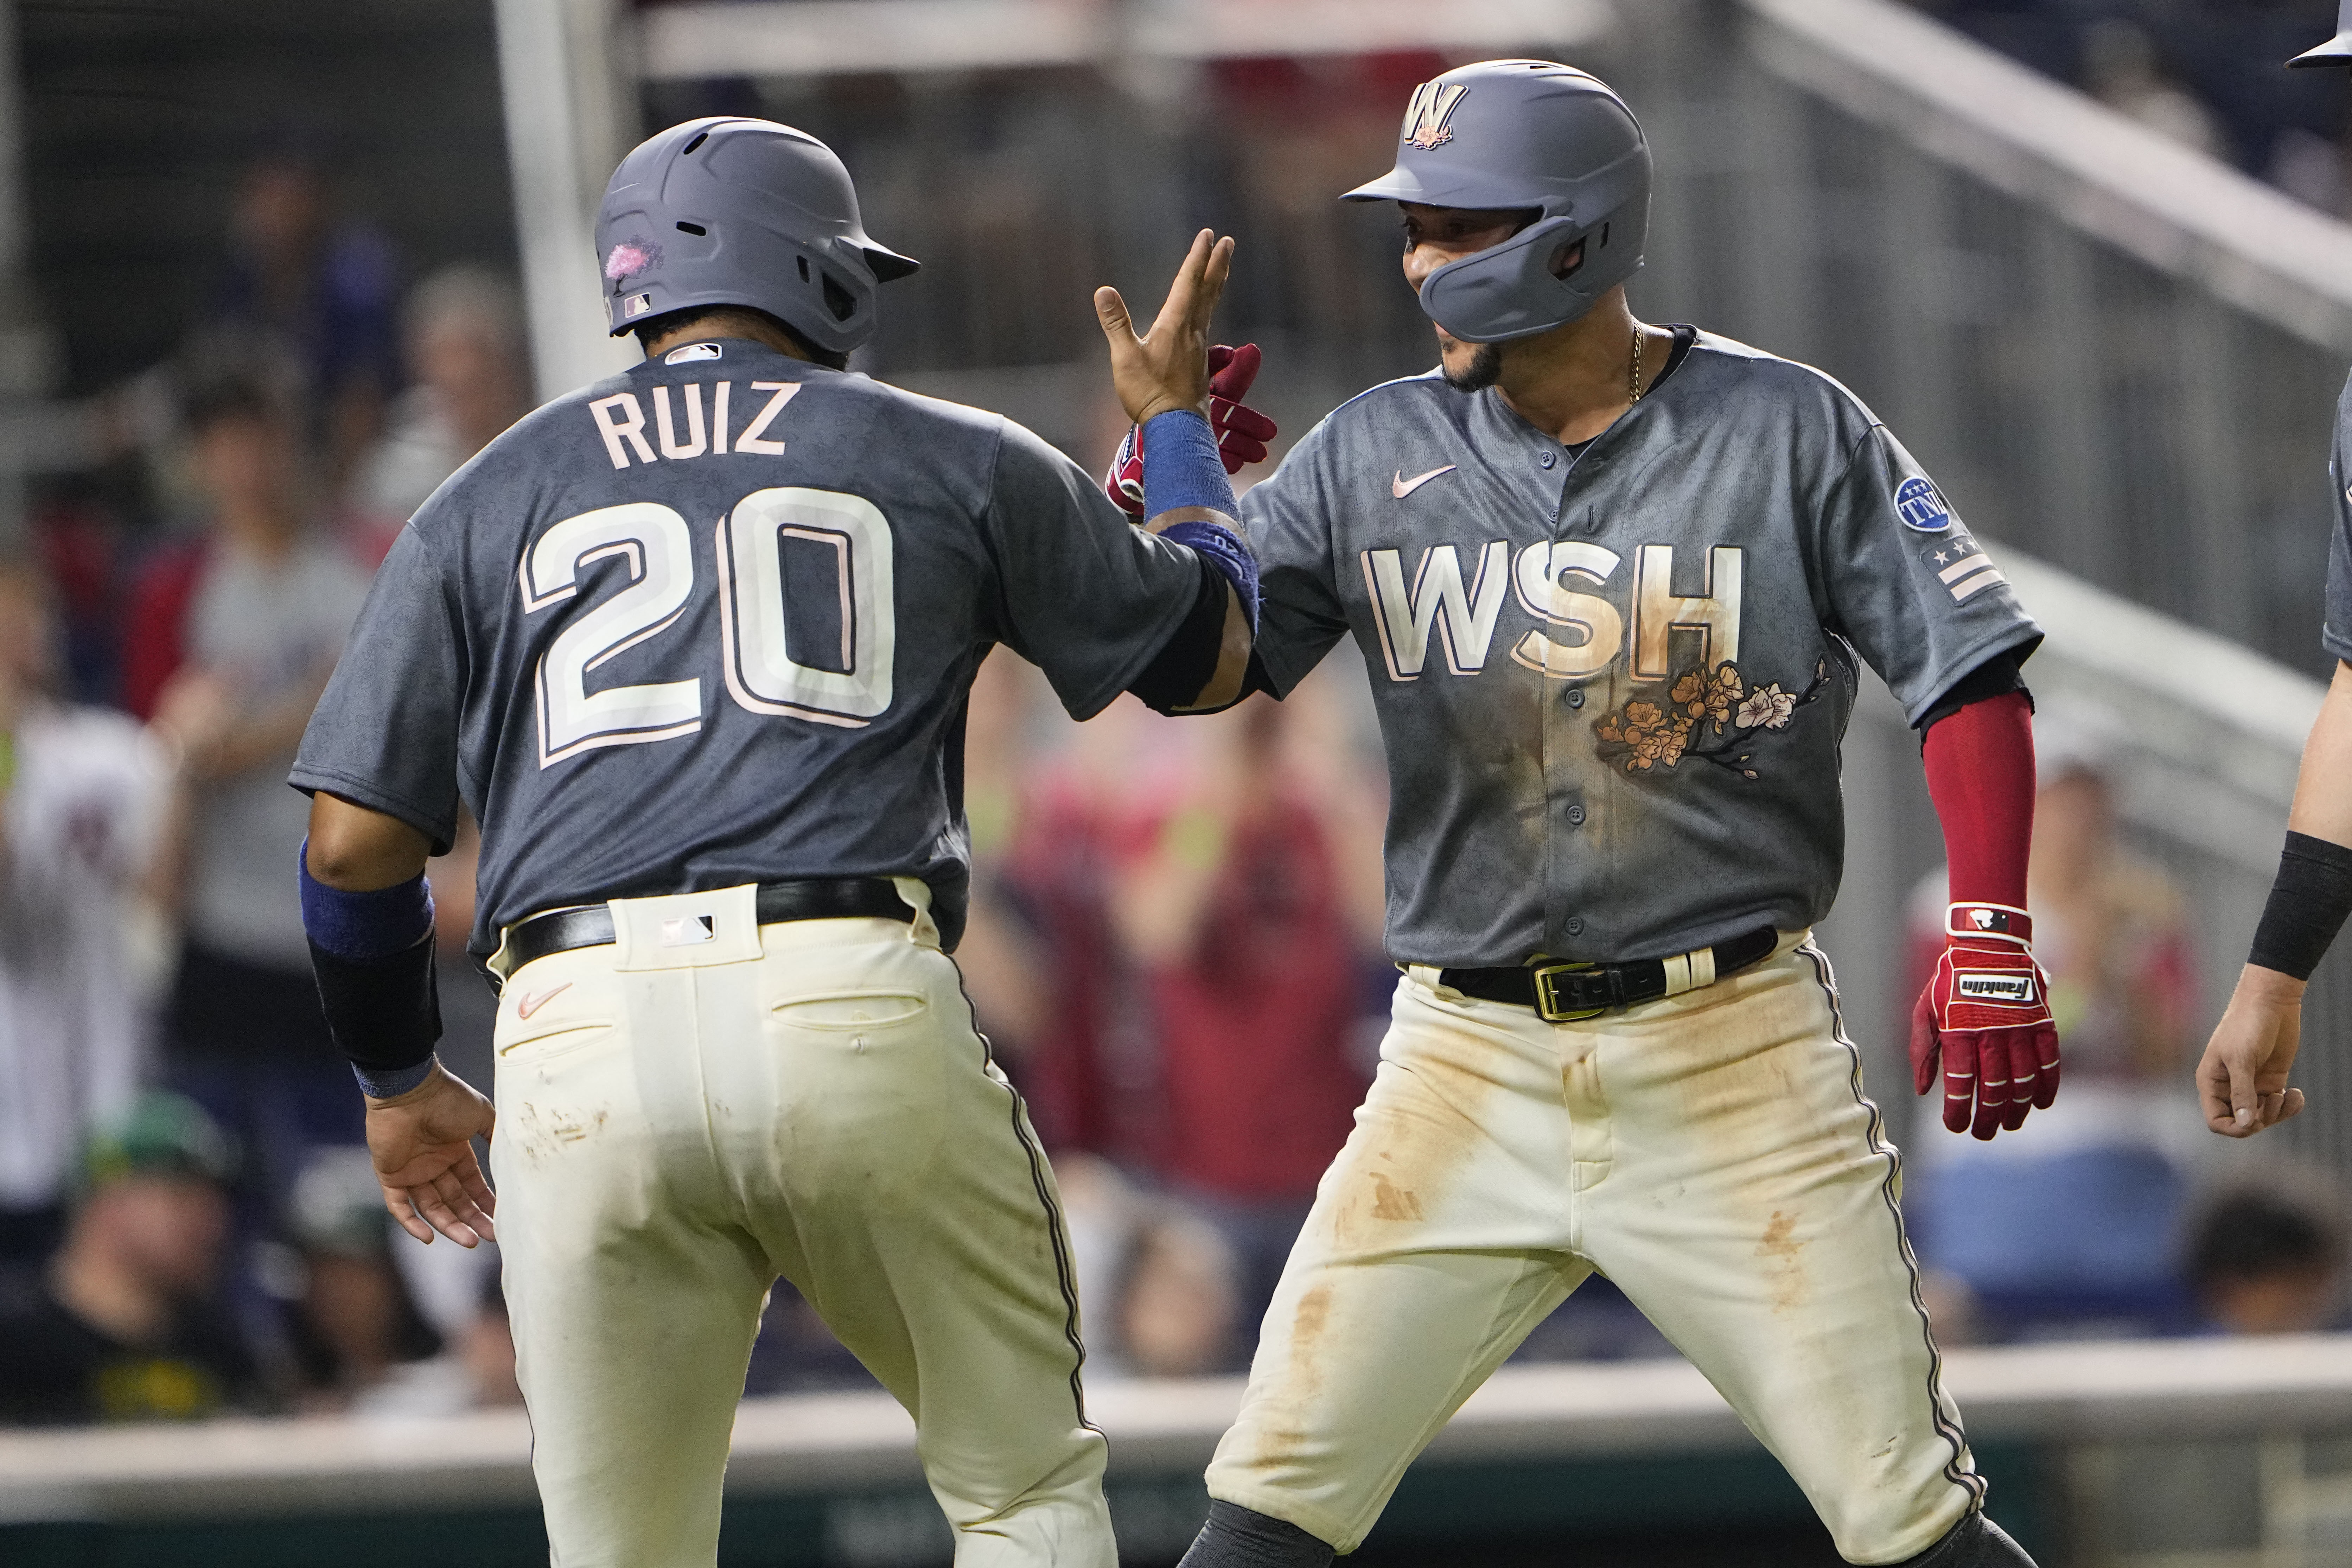 The Washington Nationals are dropping a New Uniform